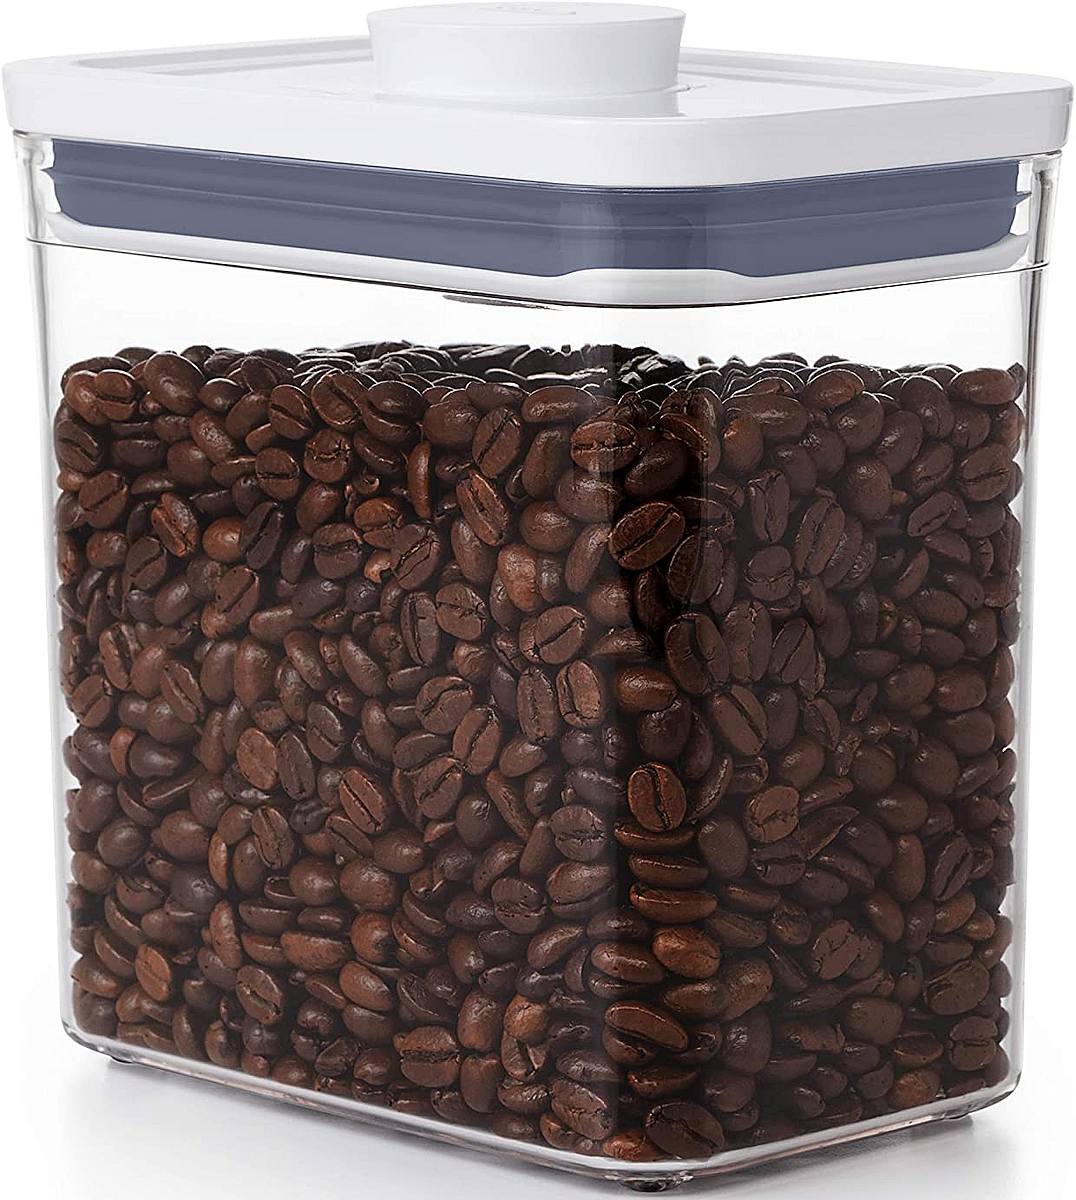 coffee storage container